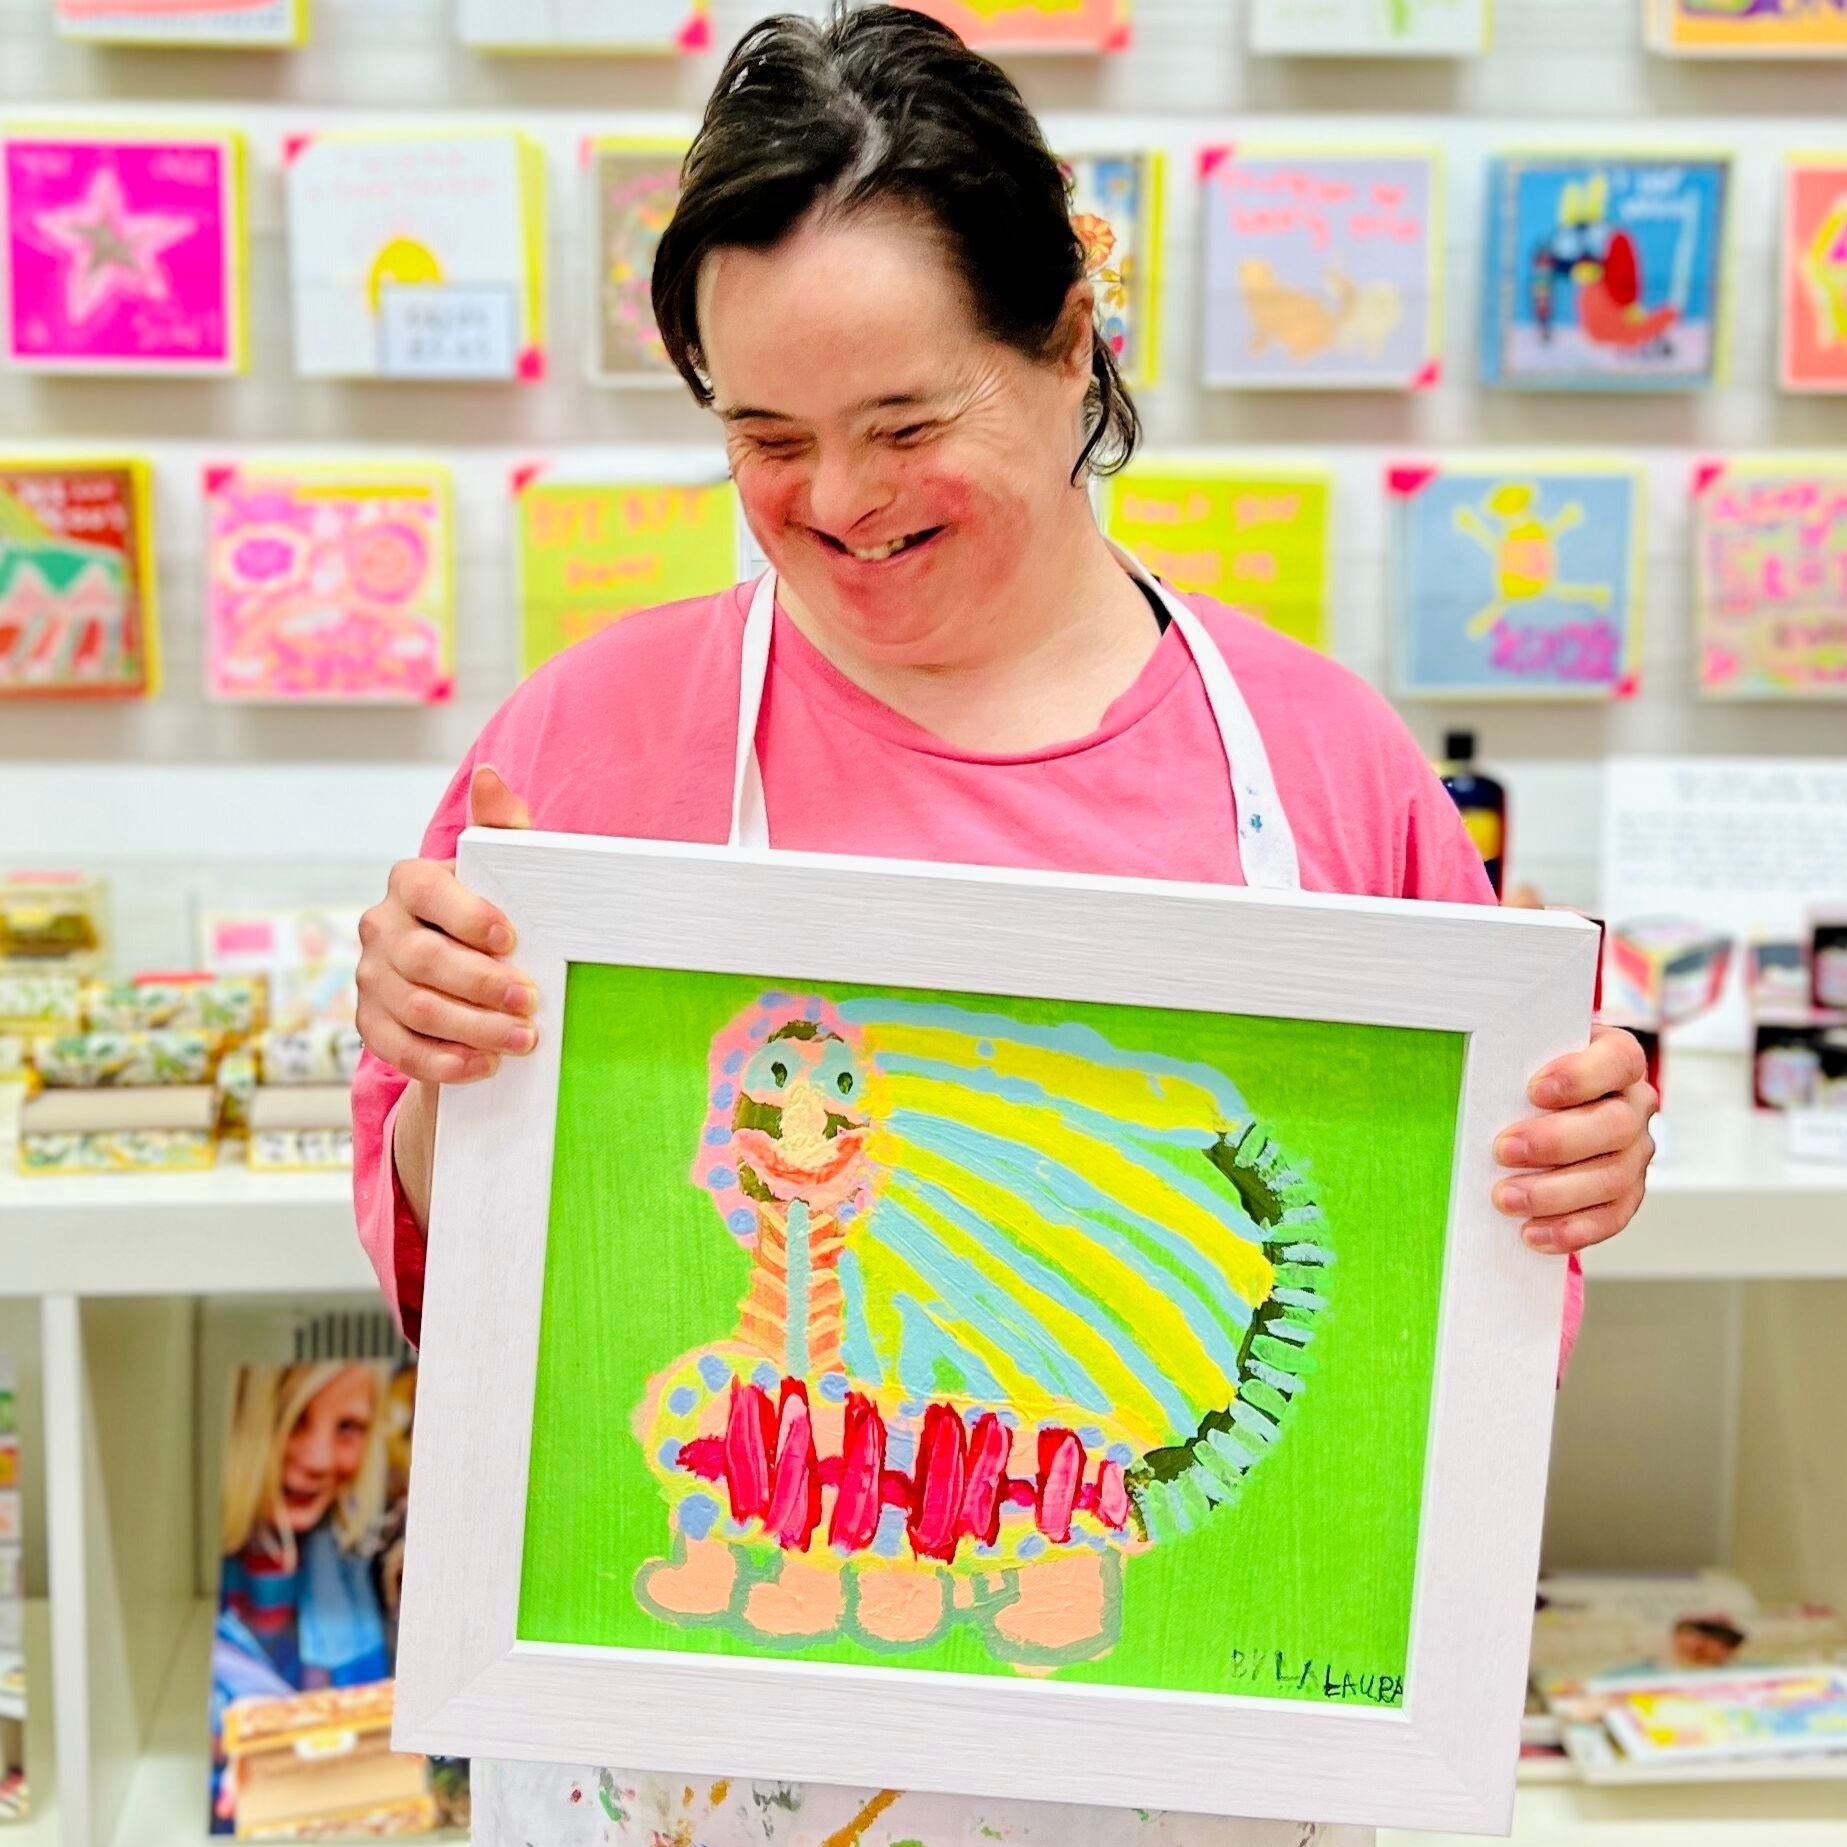 Female artist holding a framed painting of a green, yellow and pink caterpillar